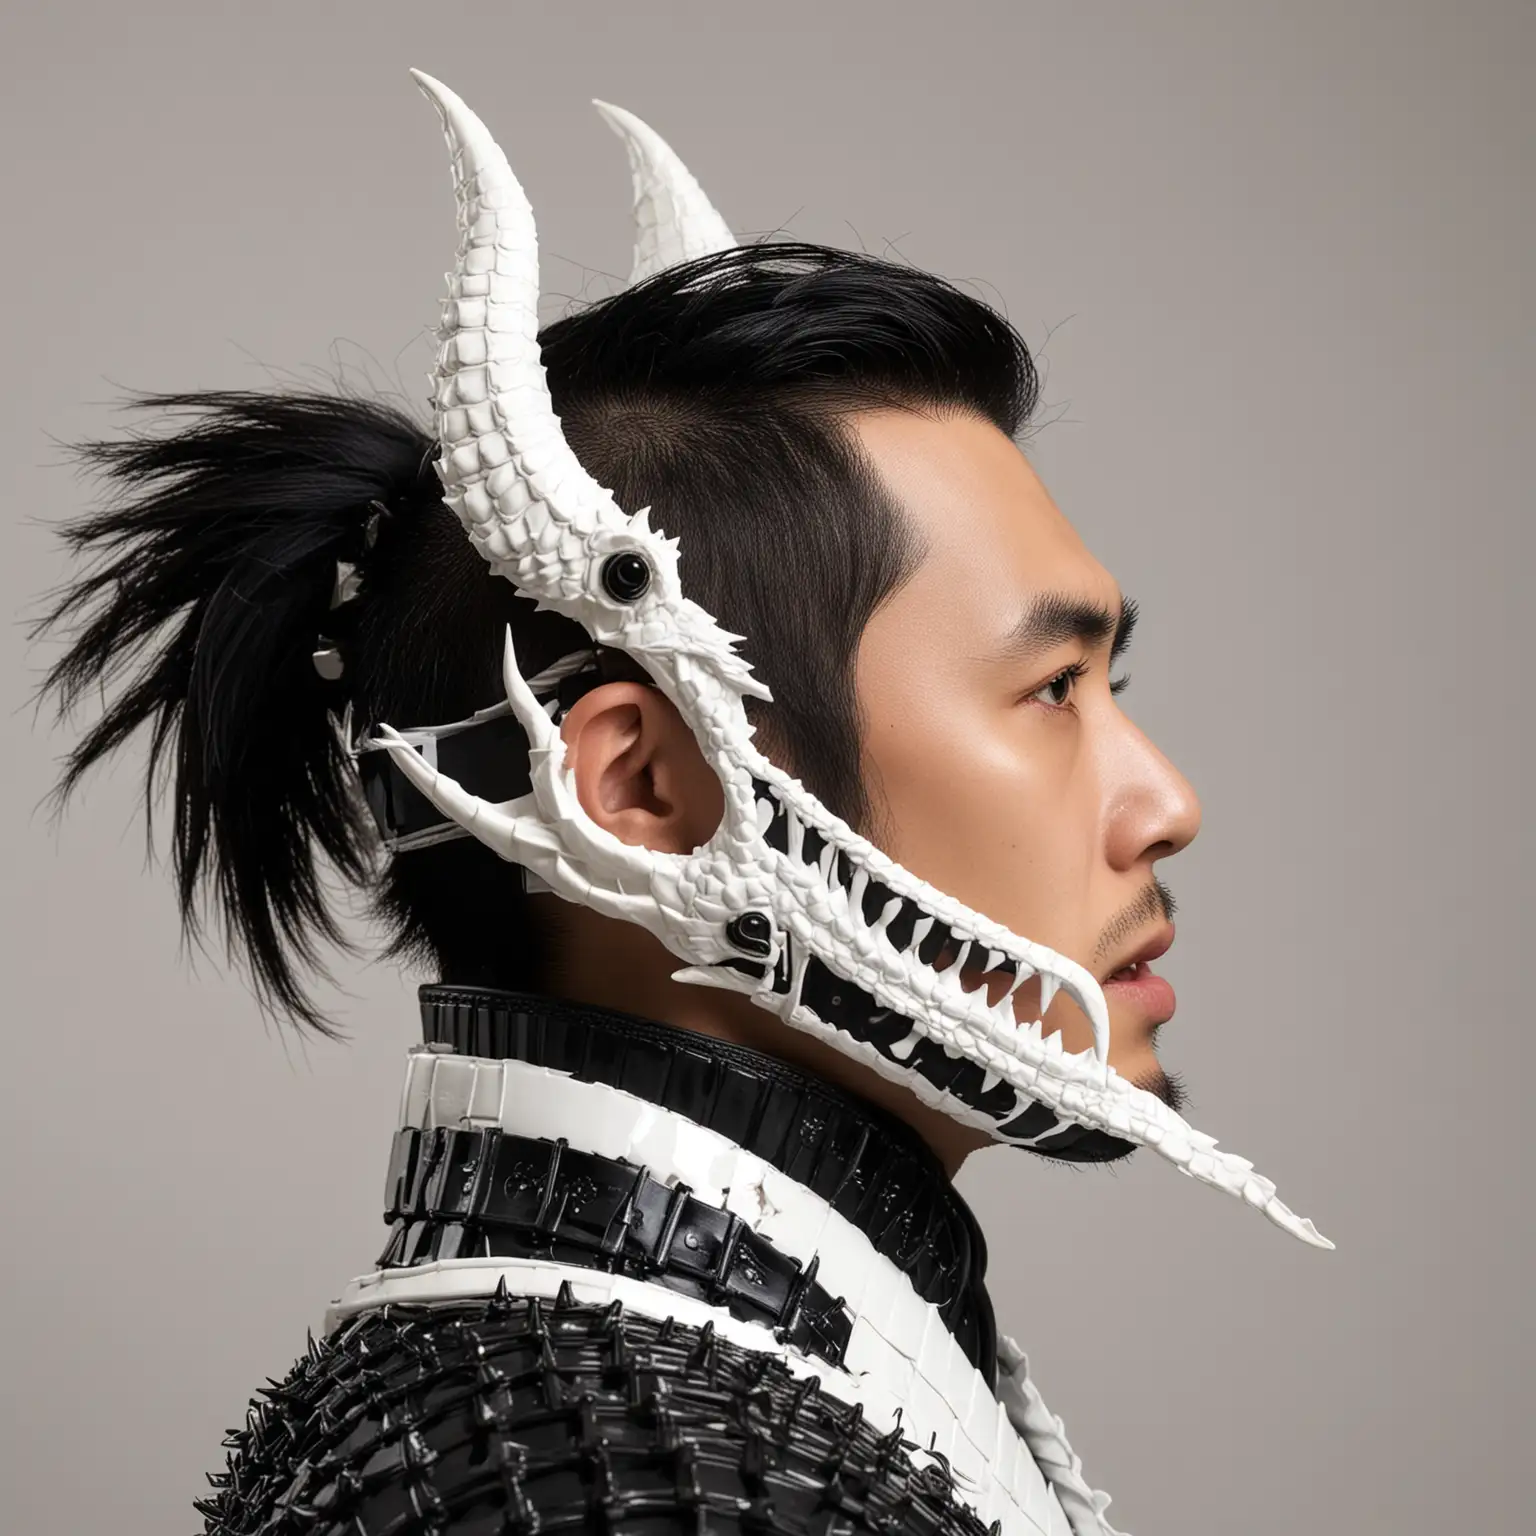 Japanese Man with Spiked Hair and Dragon Samurai Chin Guard